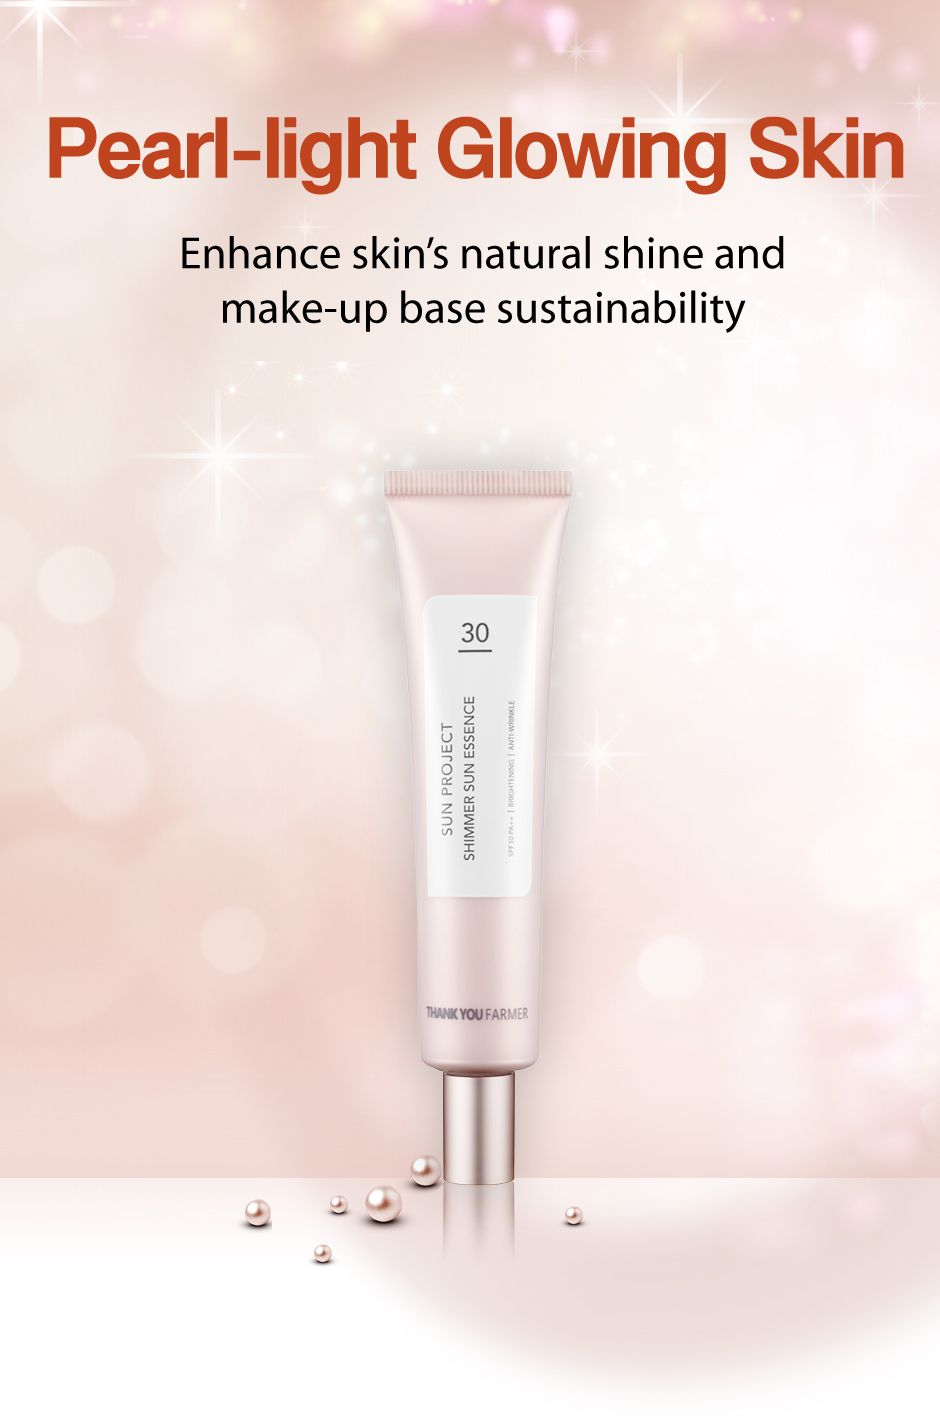 Pearl-light glowing skin, Enhanced skin's natural shine and make up base sustainability.